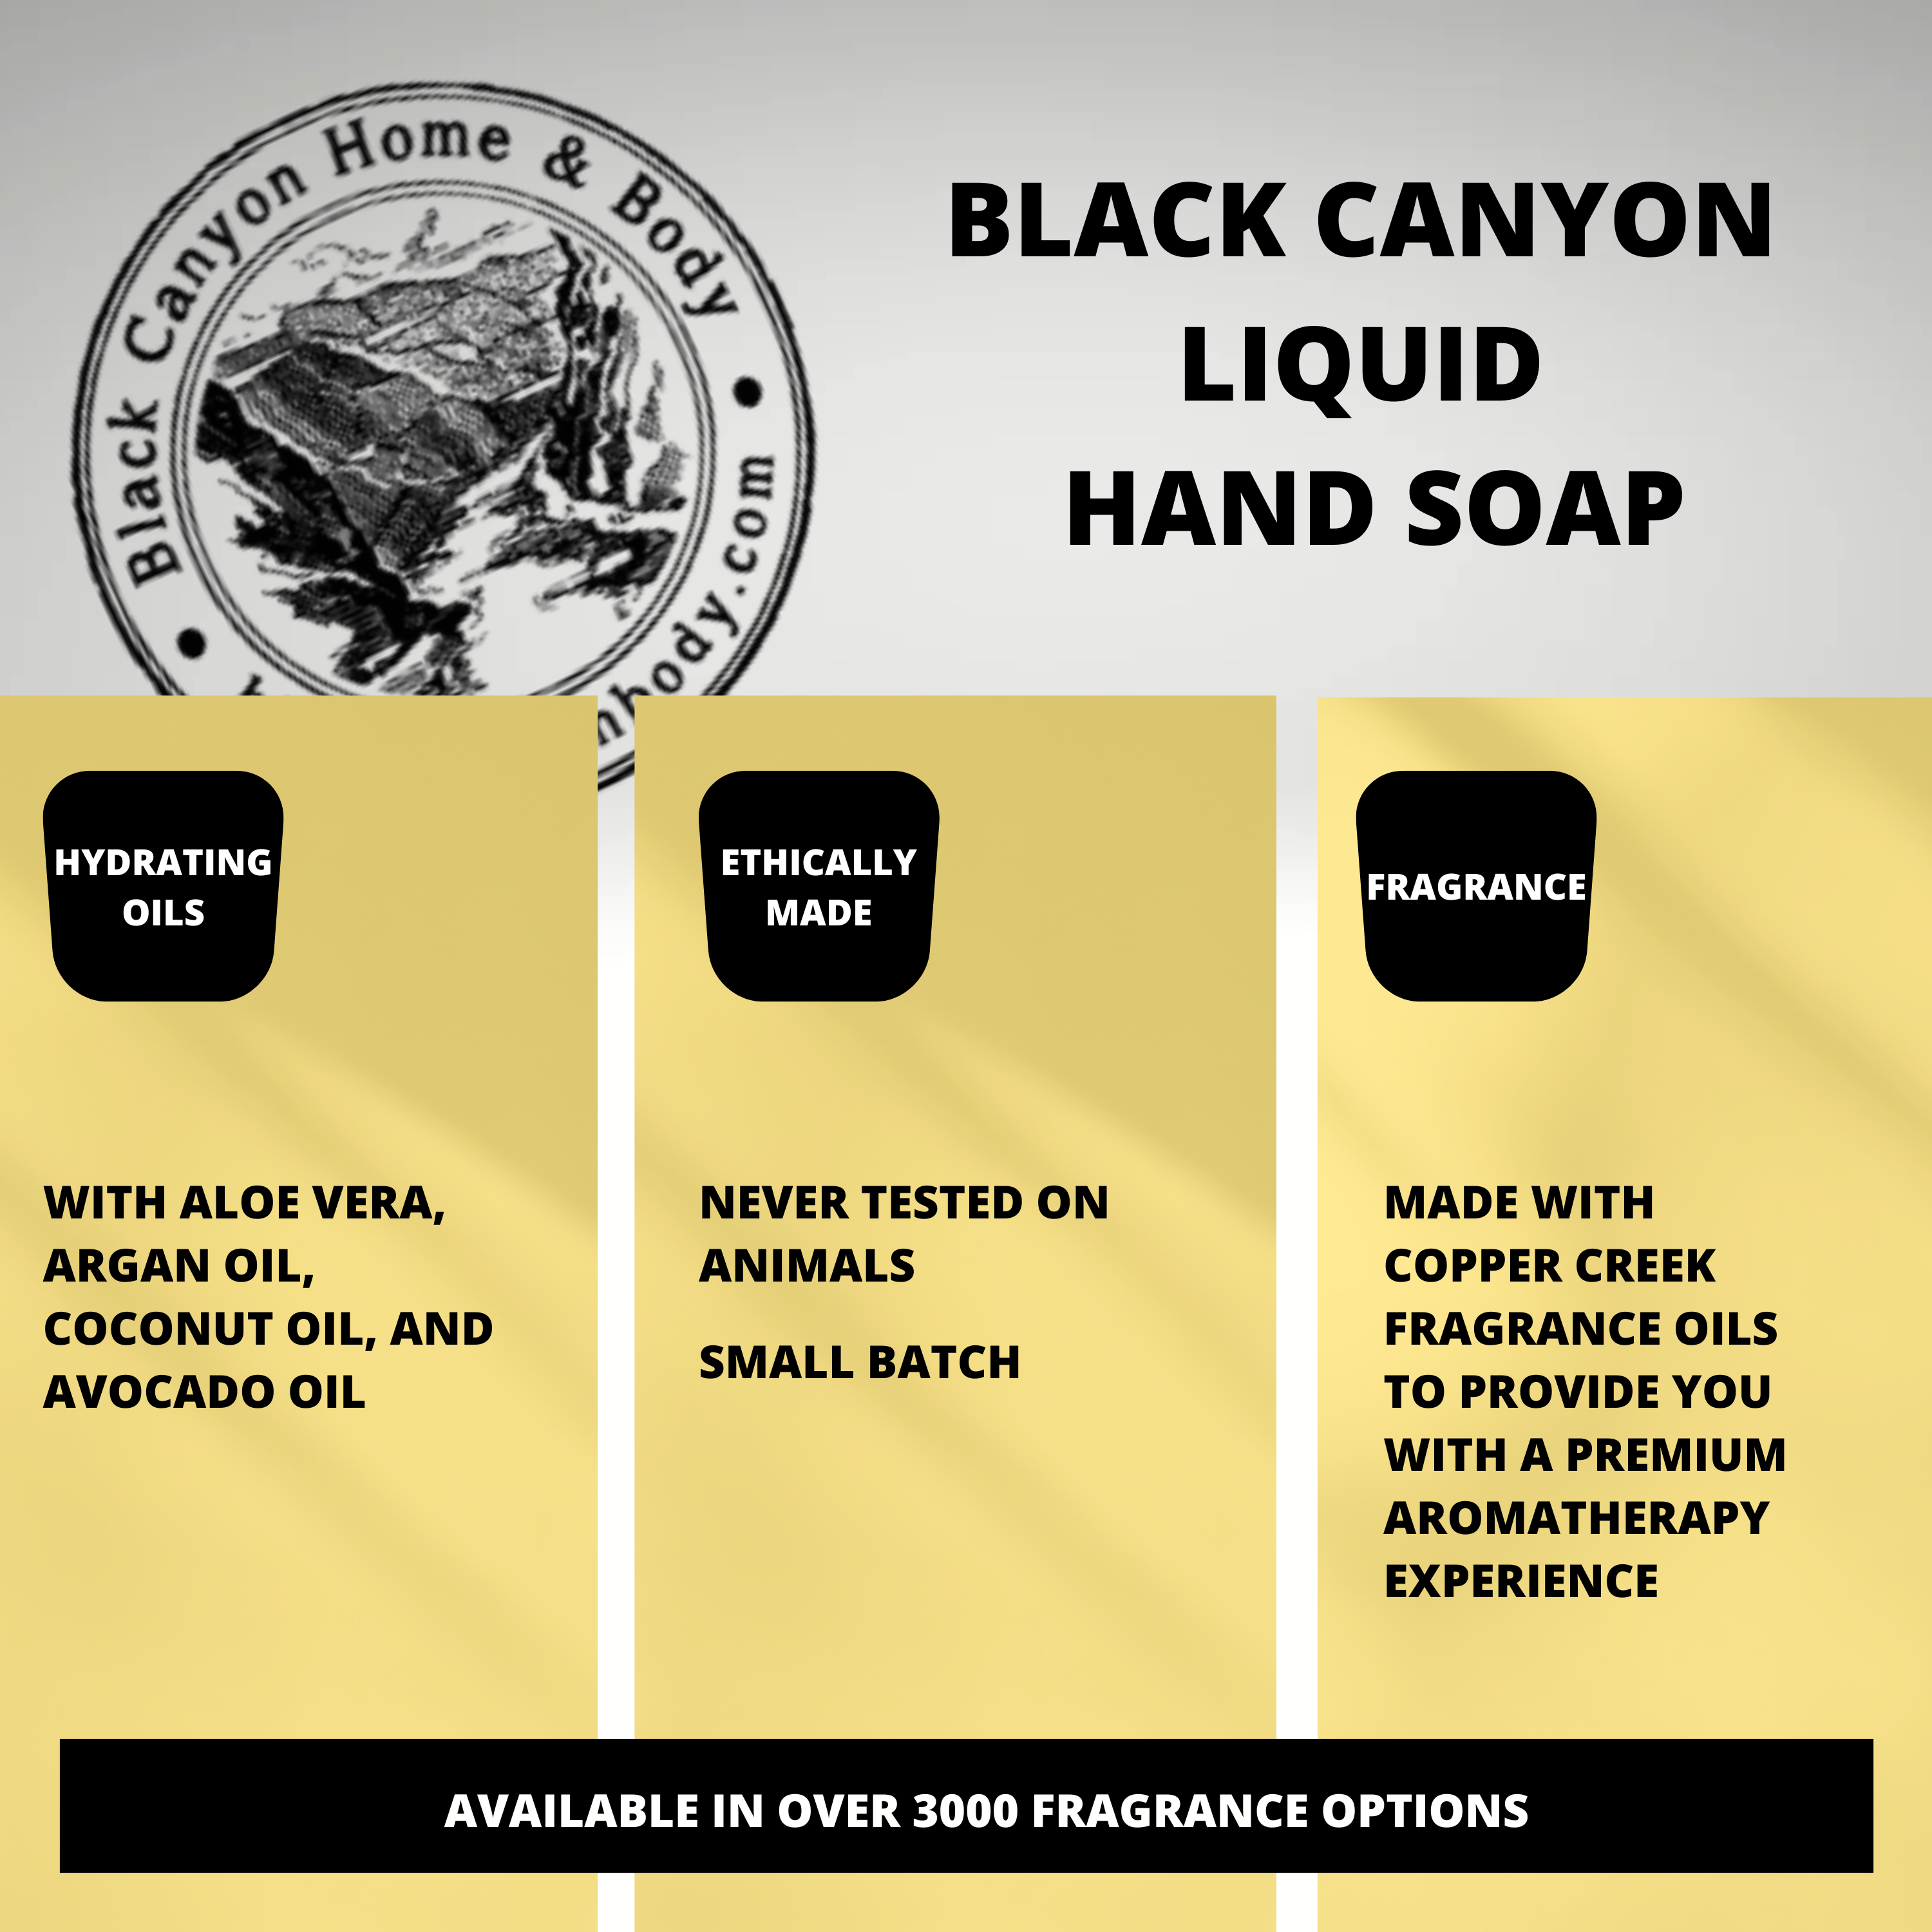 Black Canyon Chocolate Easter Egg Scented Liquid Hand Soap